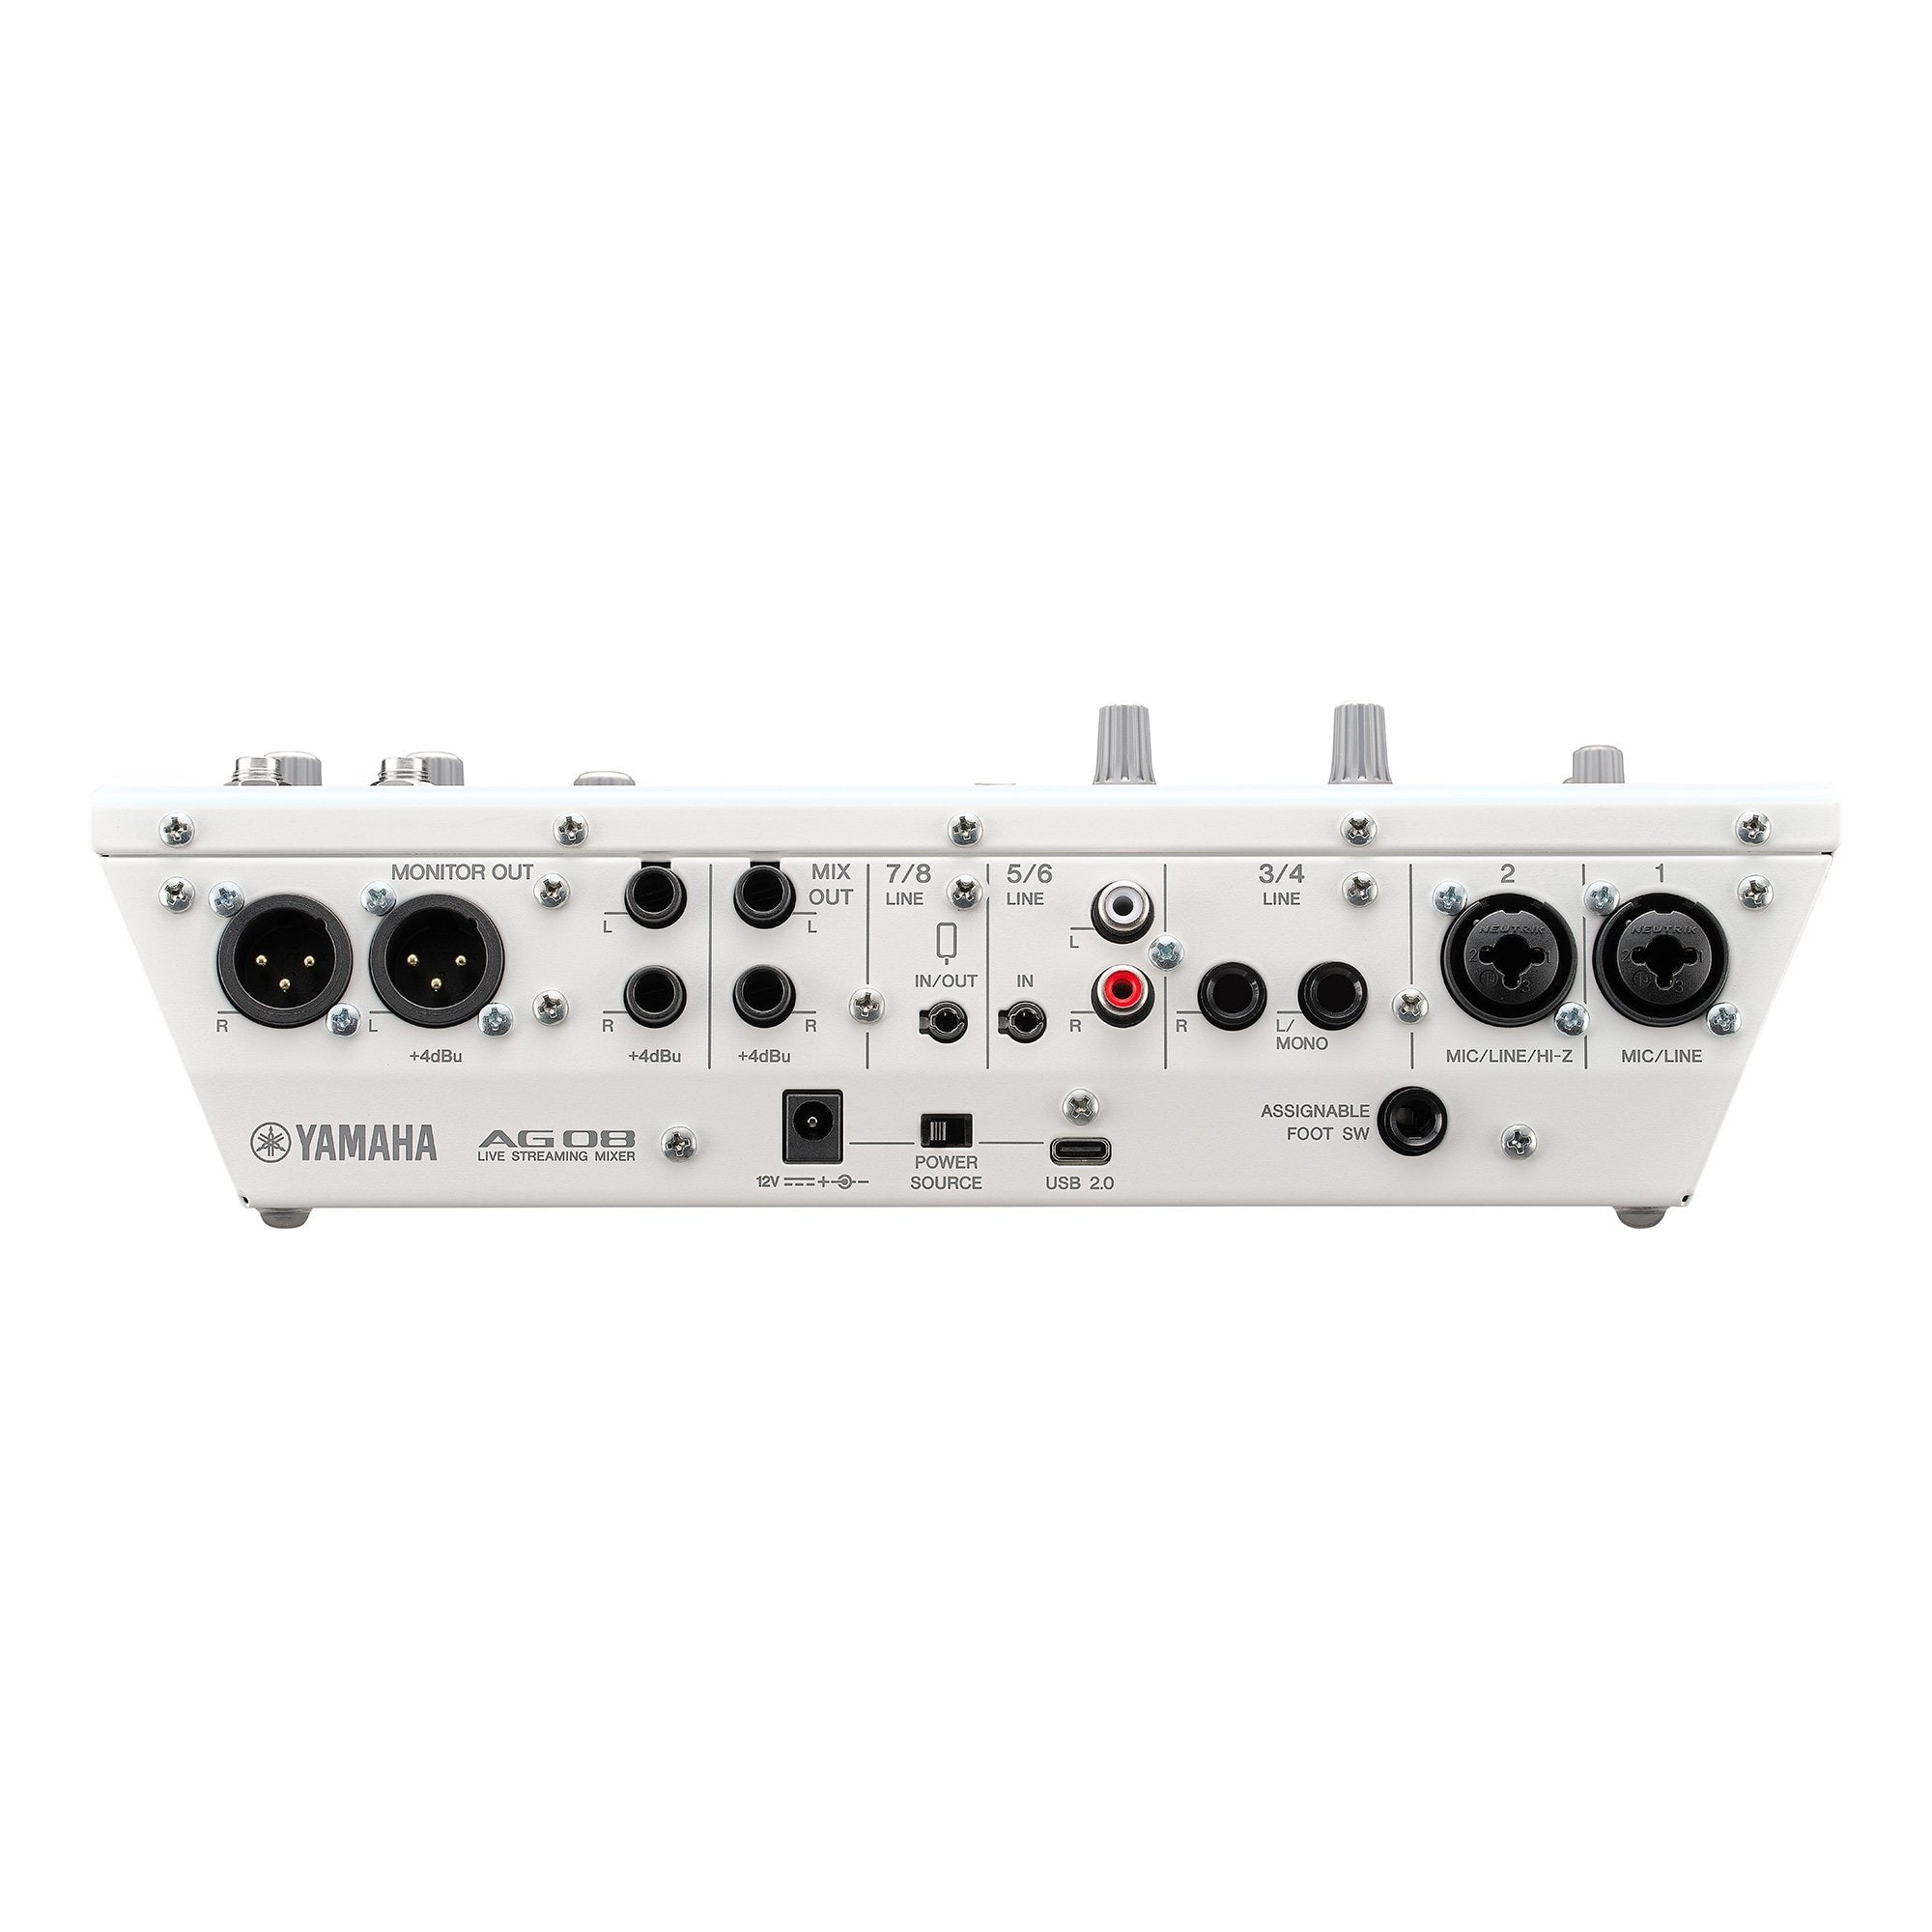 Yamaha AG08 8-channel Mixer / Audio Interface / Podcast - White